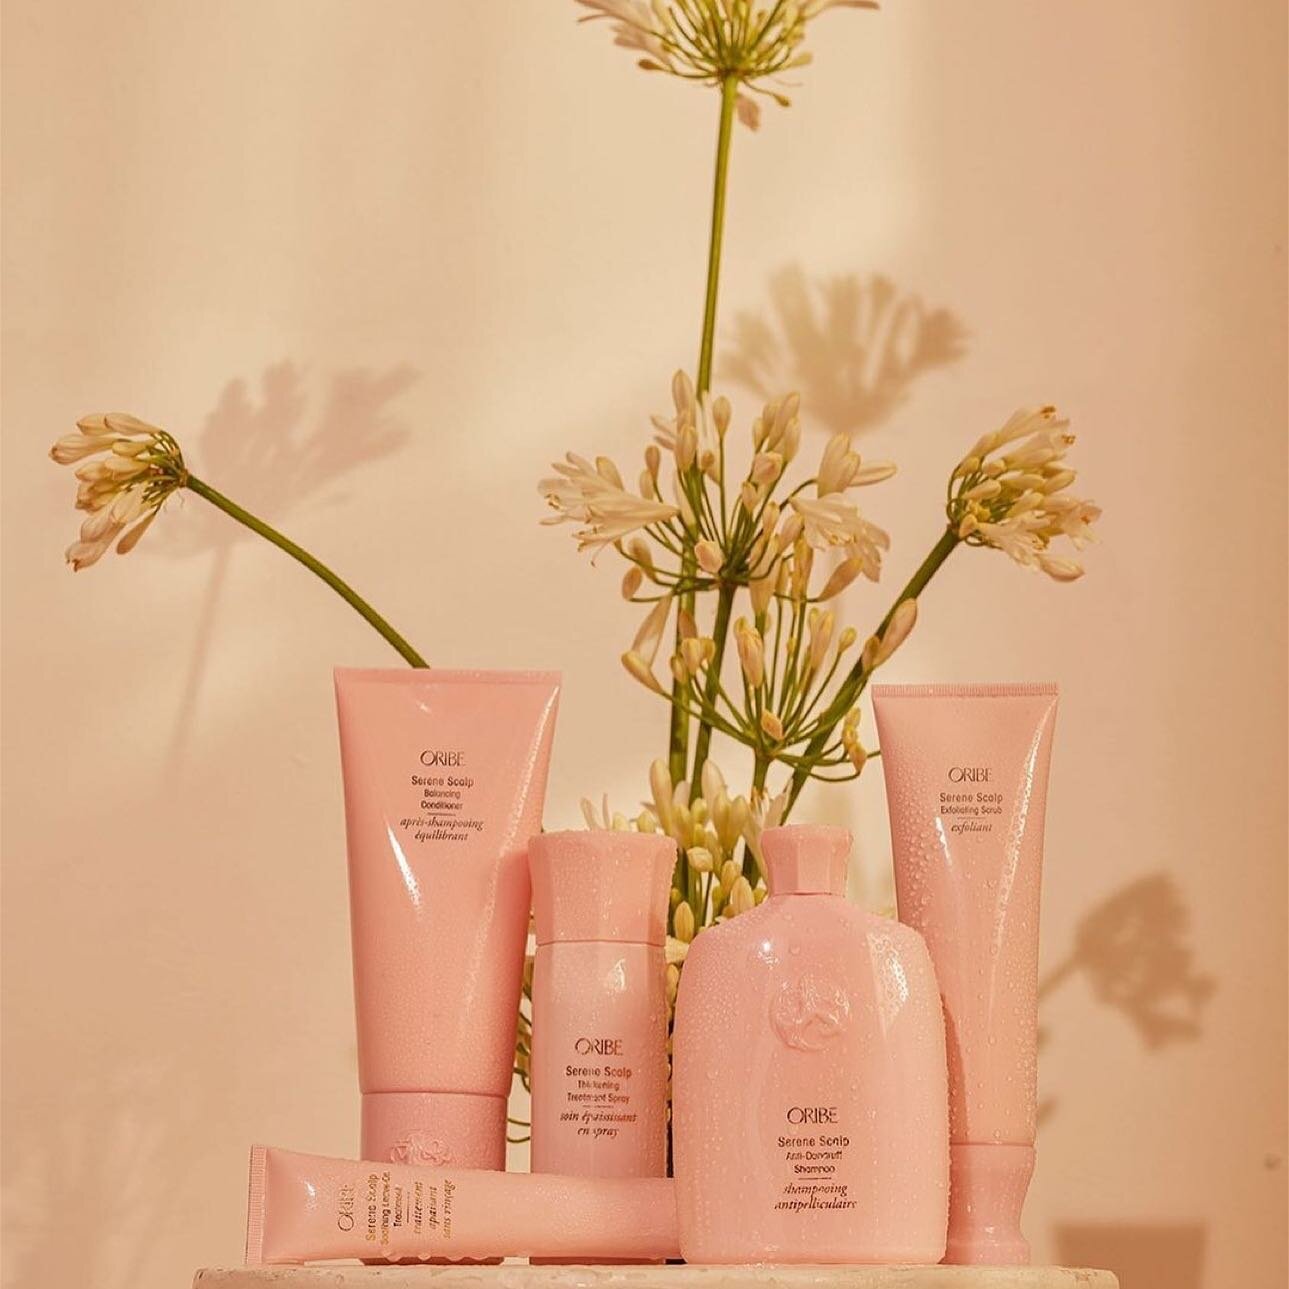 The original Serene Scalp collection, with Anti-Dandruff &amp; Balancing solutions for healthier hair and scalp. 💗

✨Serene Scalp Anti-Dandruff Shampoo: this gentle treatment cleanser, formulated with salicylic acid, relieves &amp; prevents dandruff